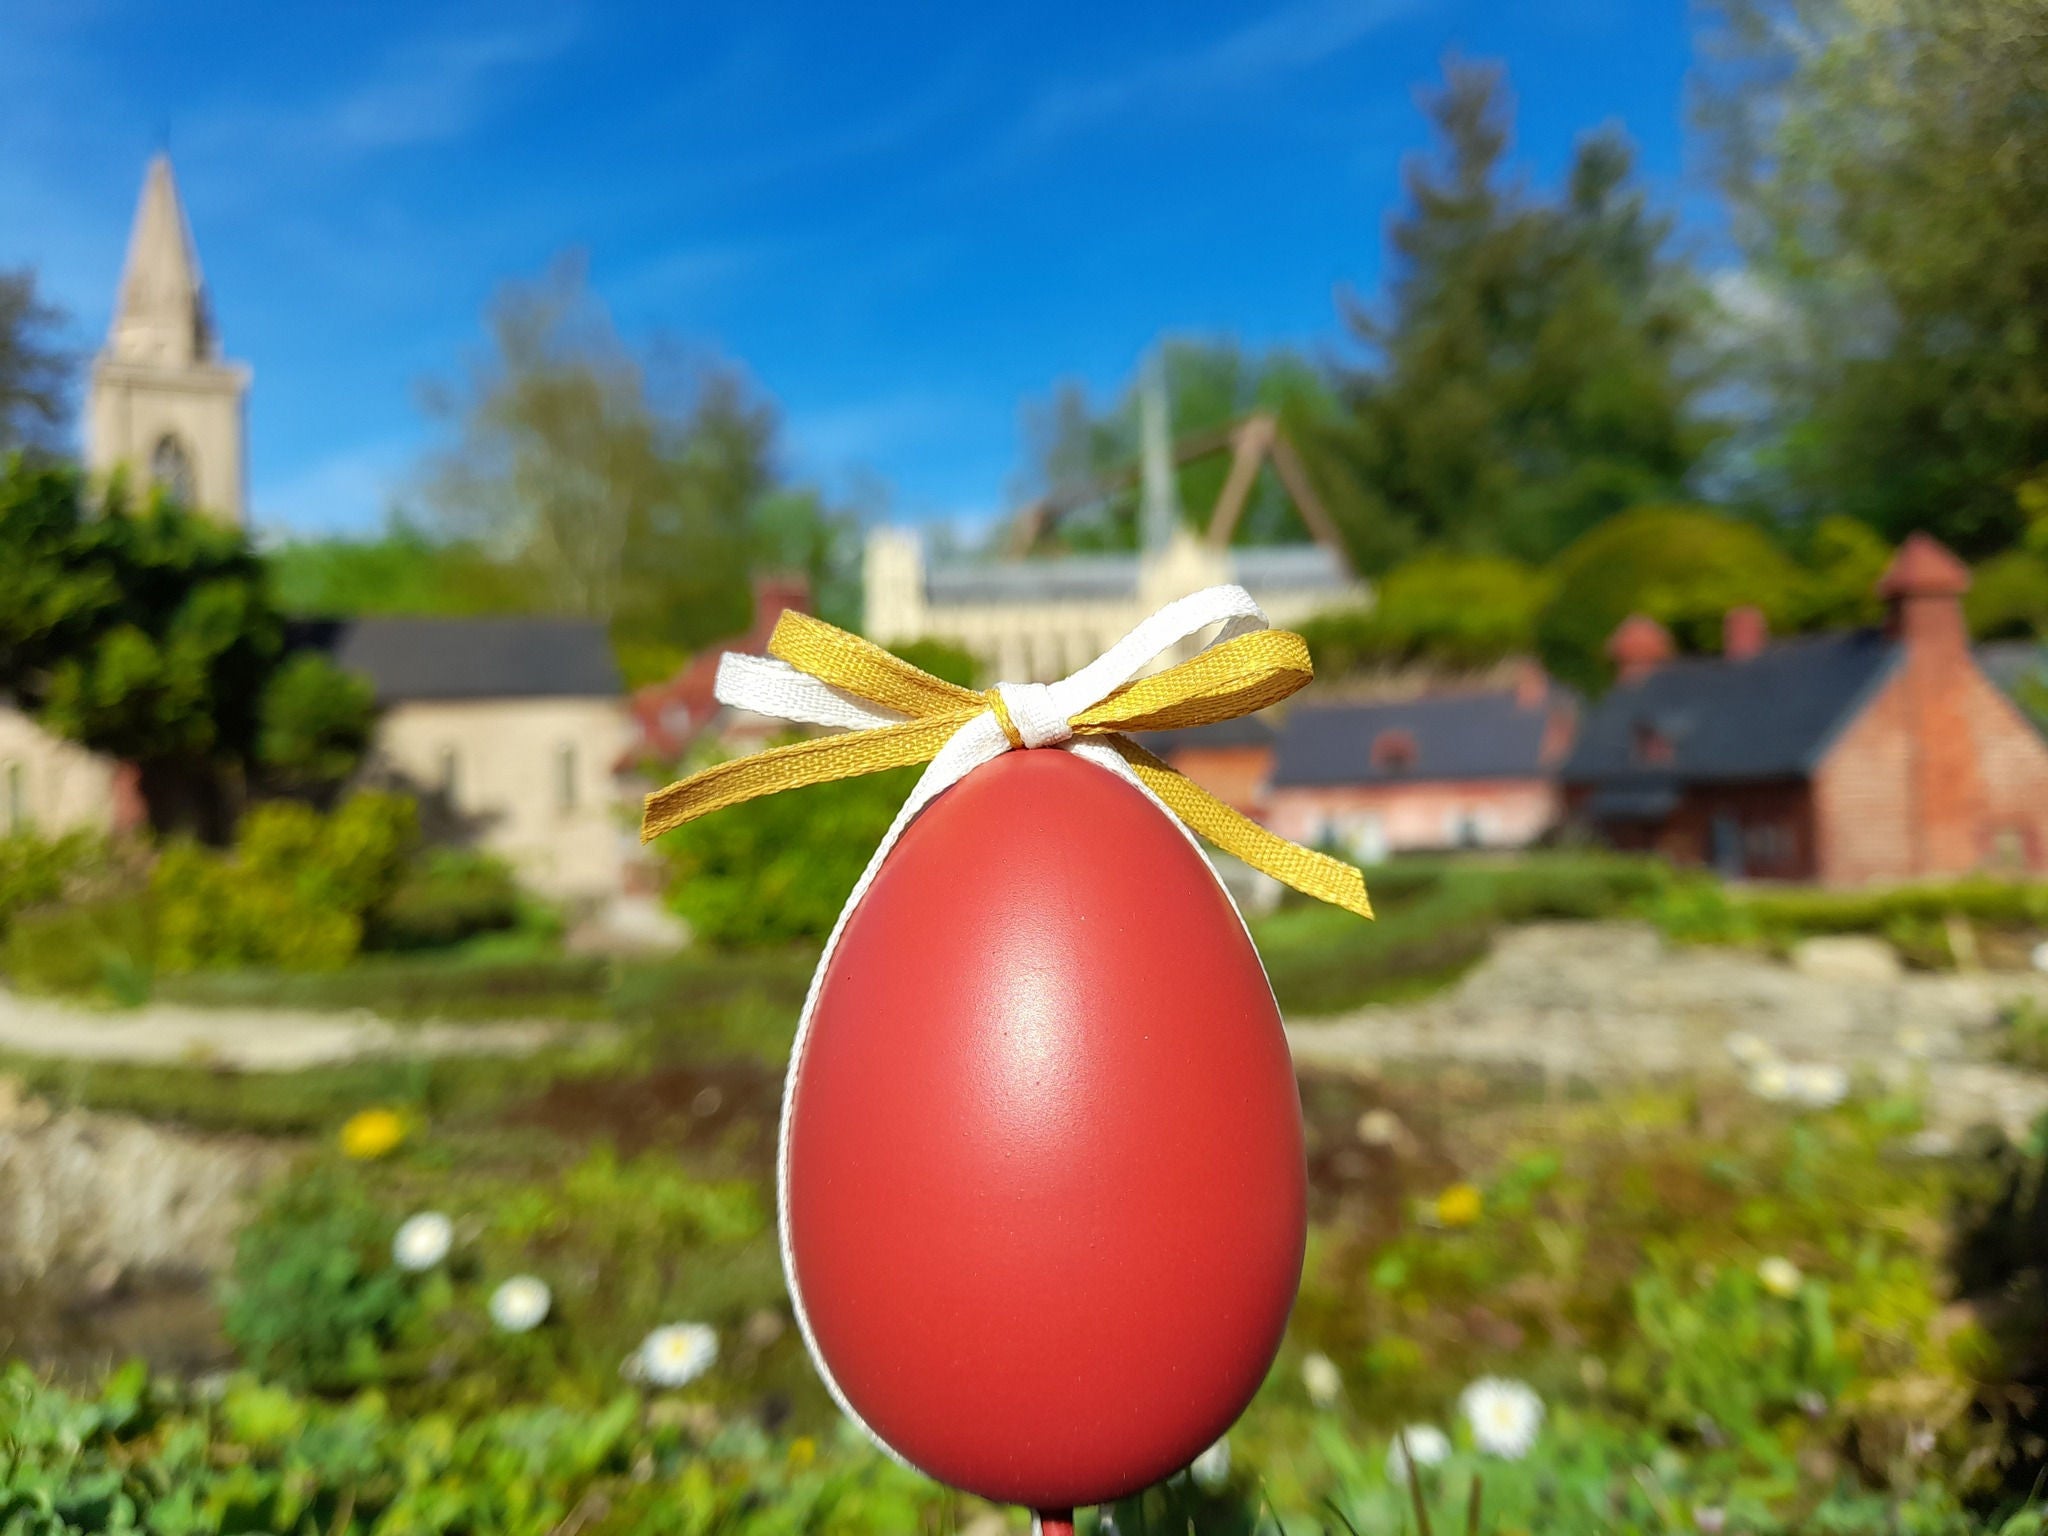 A red Easter egg with a ribbon sits among miniature monuments.